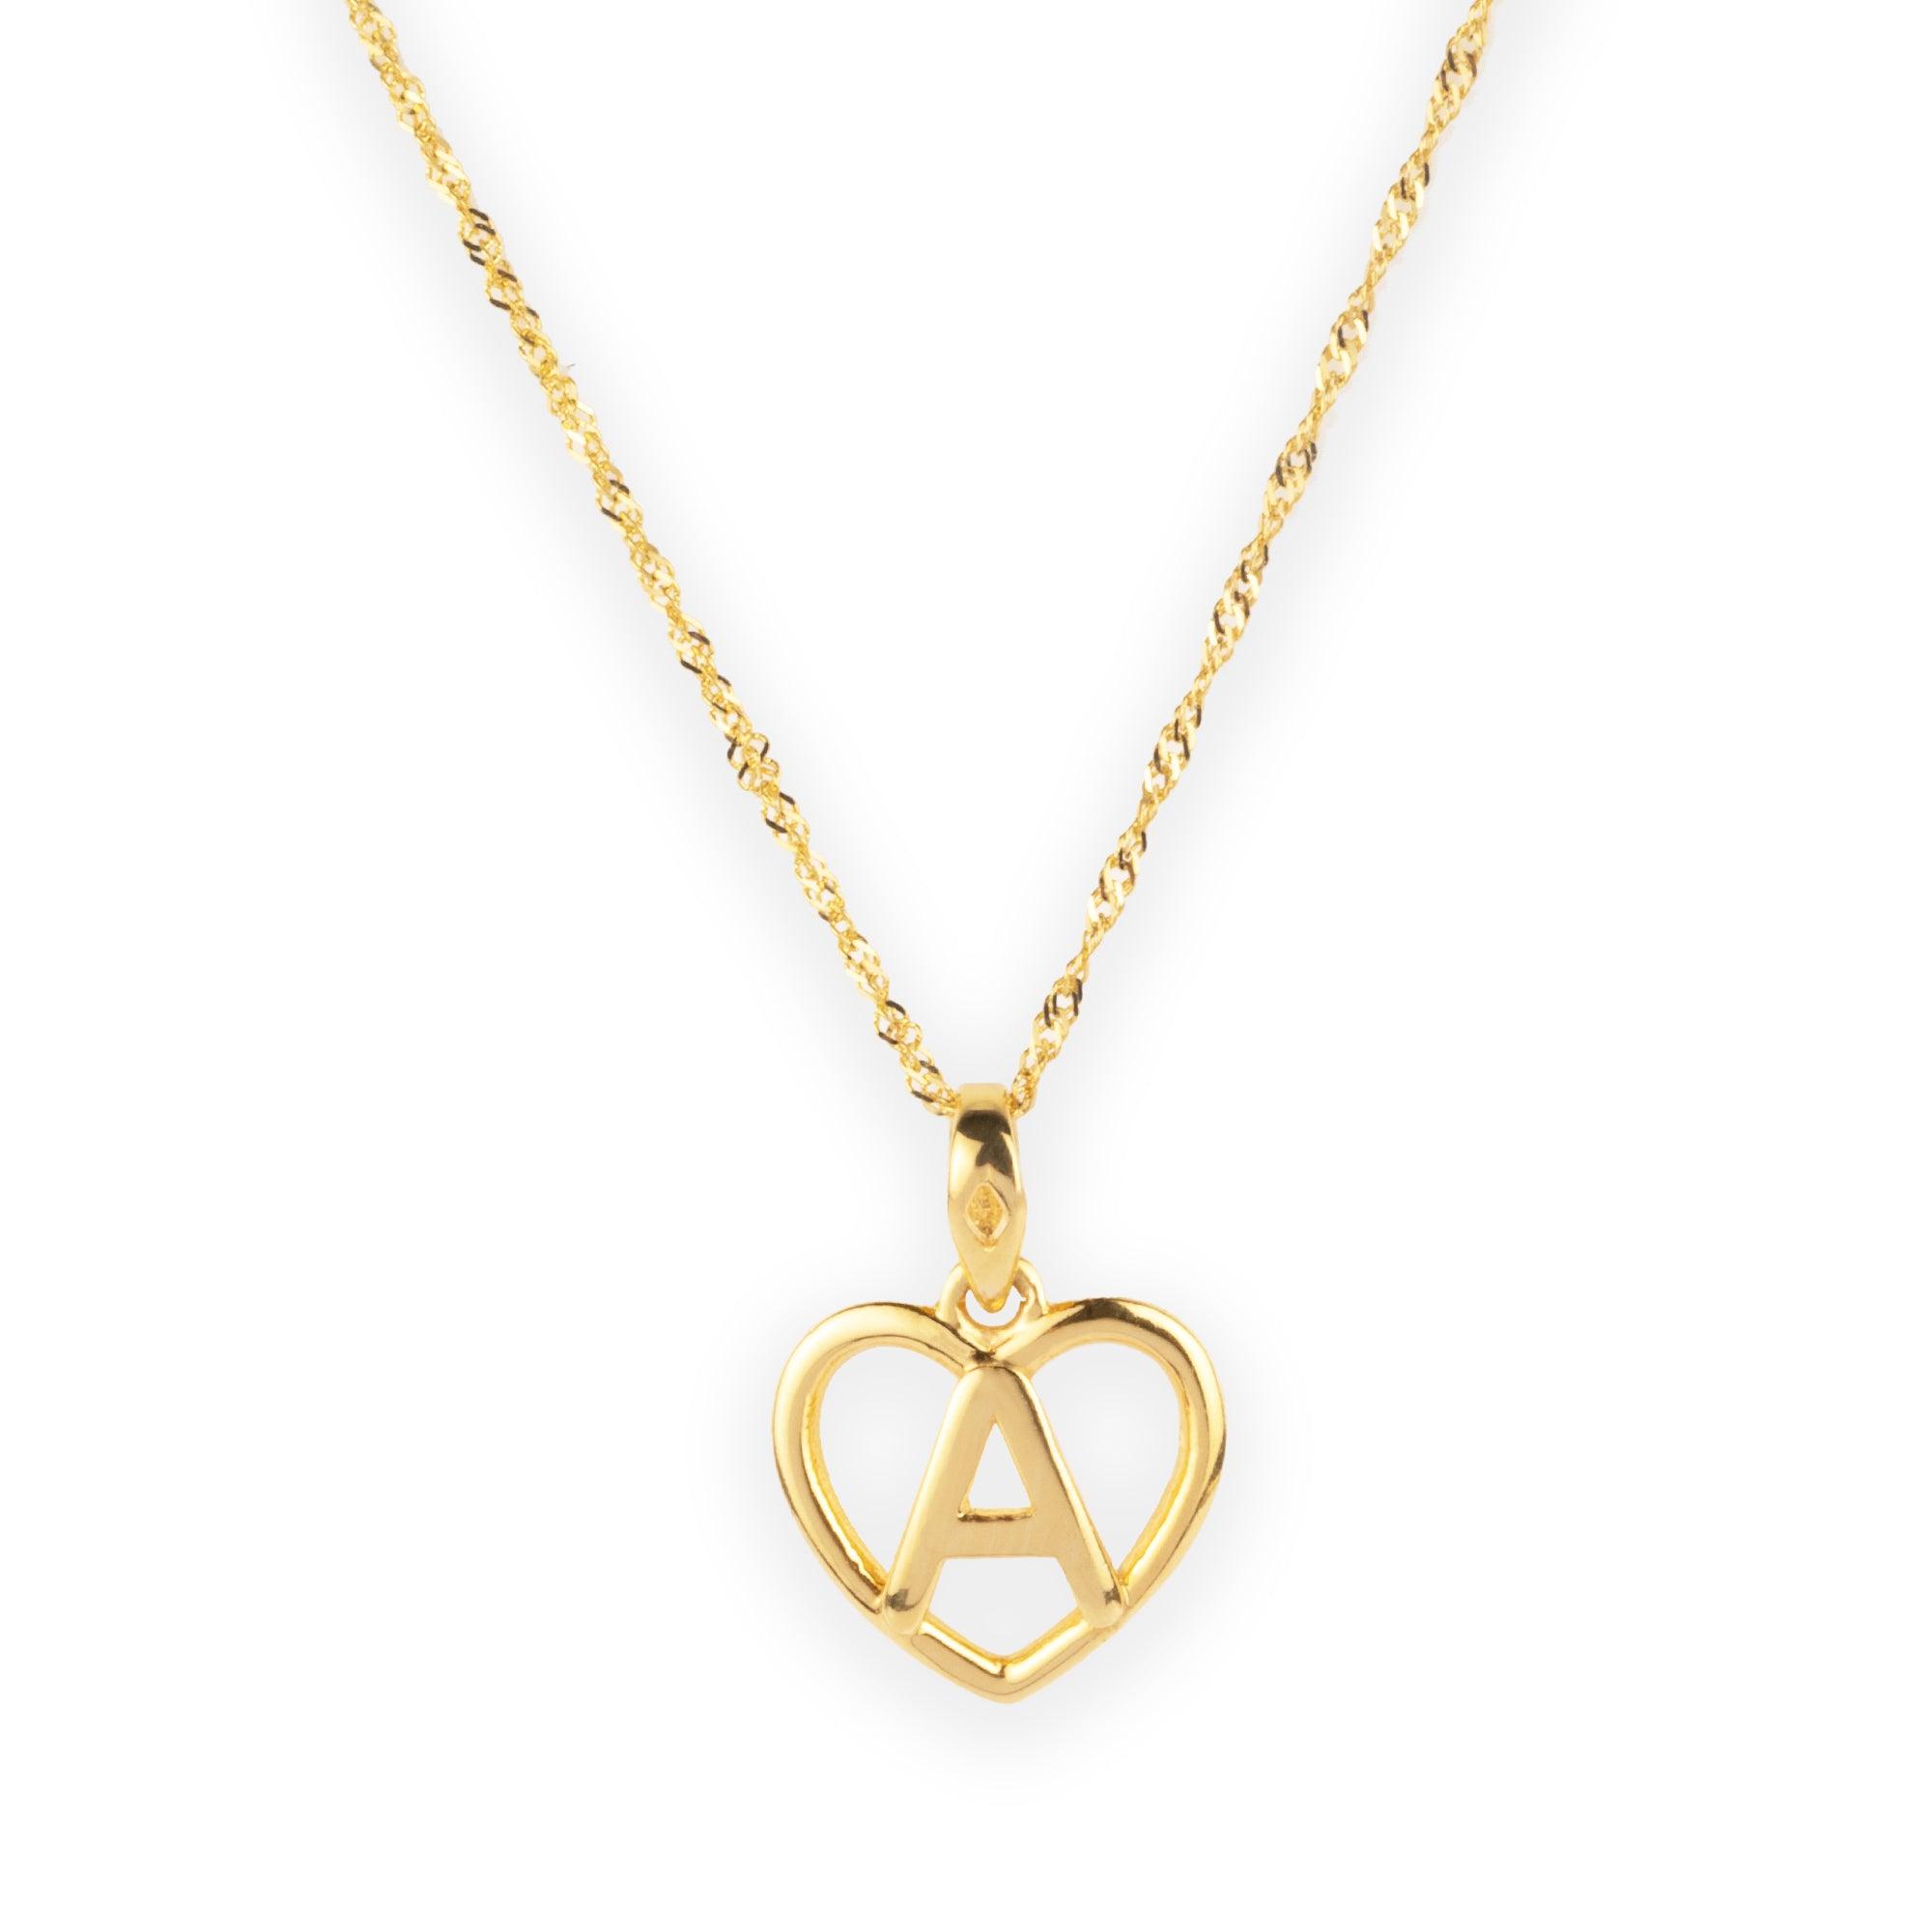 'A' 22ct Gold Heart Shape Initial Pendant P-7033 - Minar Jewellers